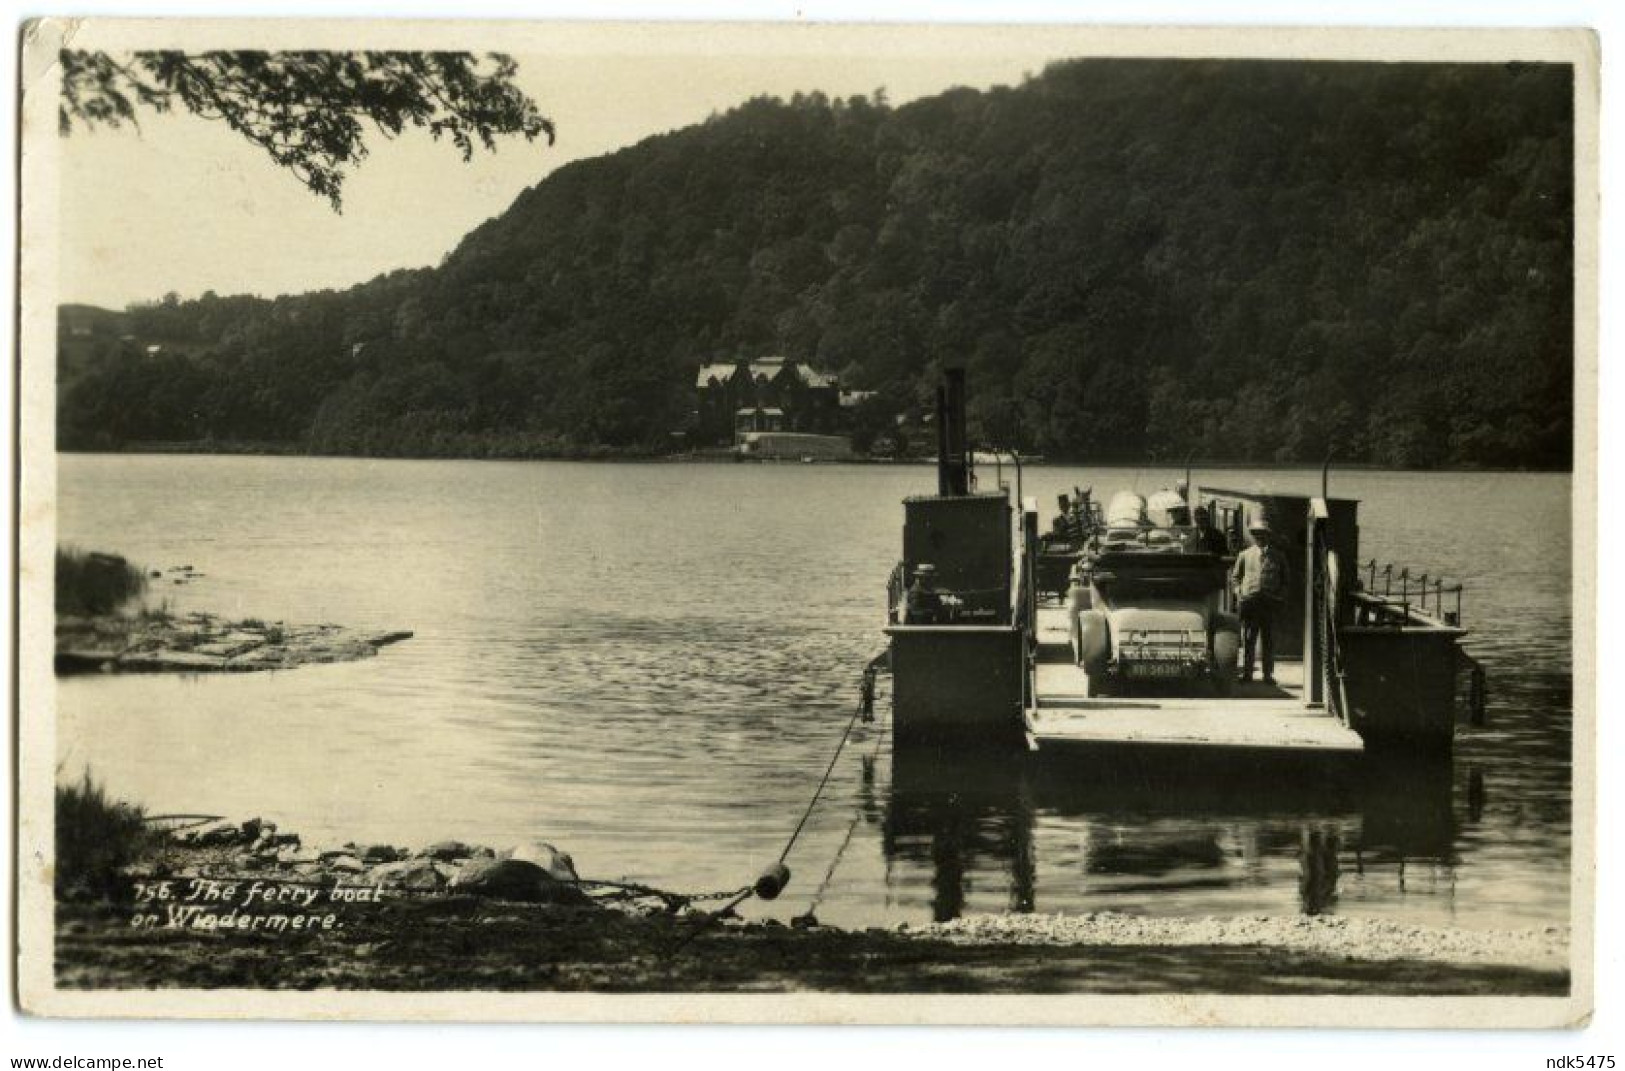 THE FERRY BOAT AT WINDERMERE (ABRAHAMS SERIES) / LONDON, WEMBLEY HILL, CLIFTON AVENUE (MUNDSAY) - Windermere